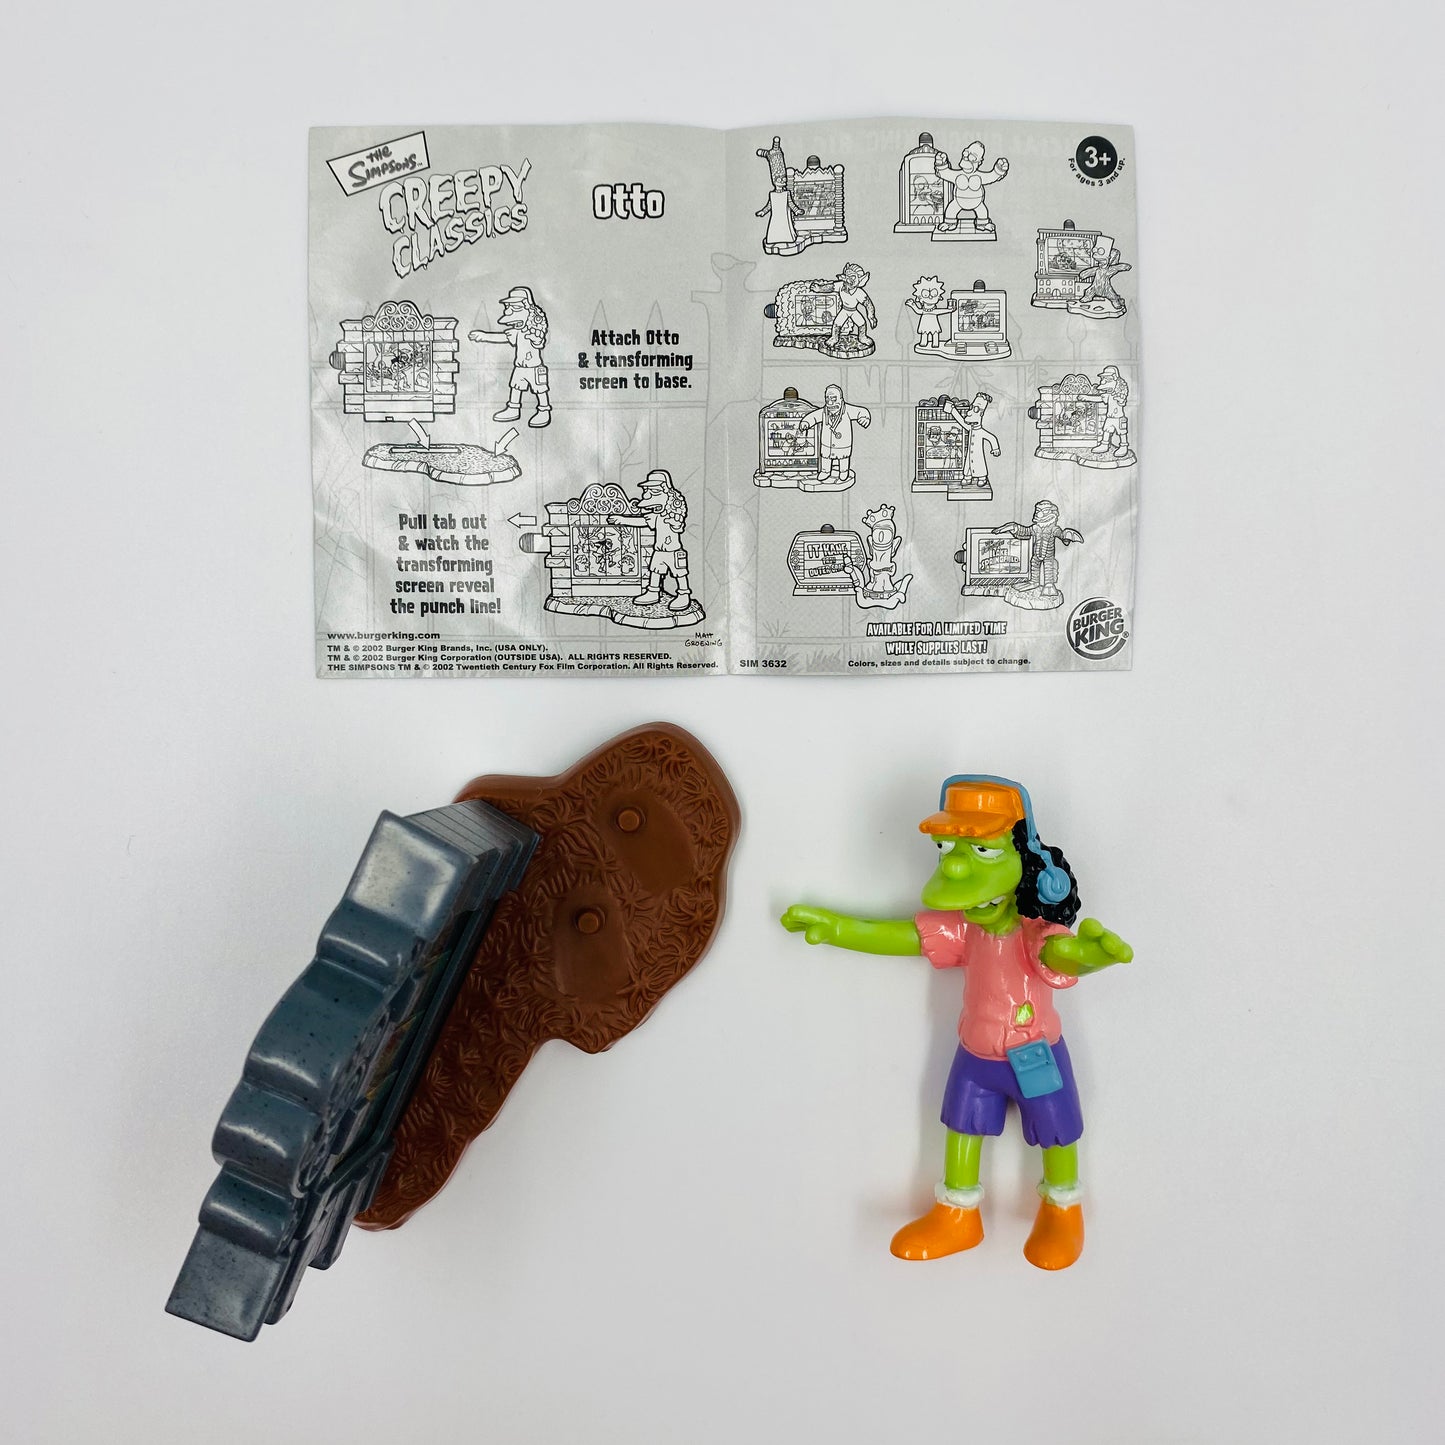 The Simpsons Creepy Classics Otto Burger King Kids' Meals toy (2002) loose